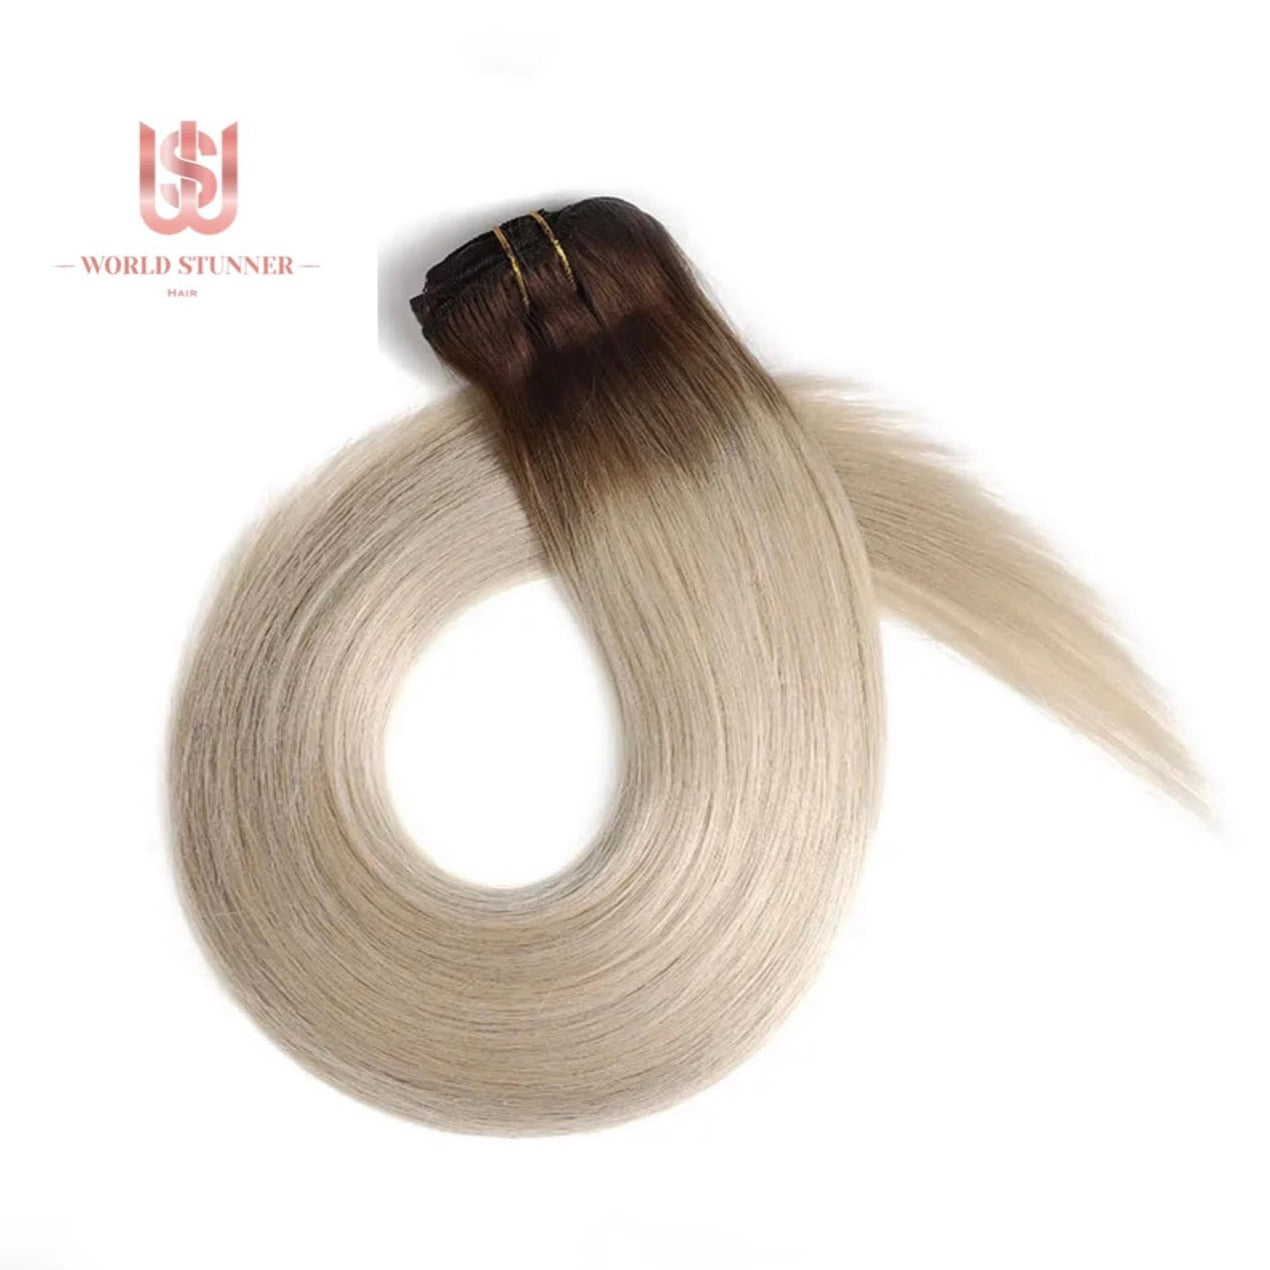 6T60A - SUPER THICK 22” 7 PIECE STRAIGHT CLIPS IN HAIR EXTENSIONS